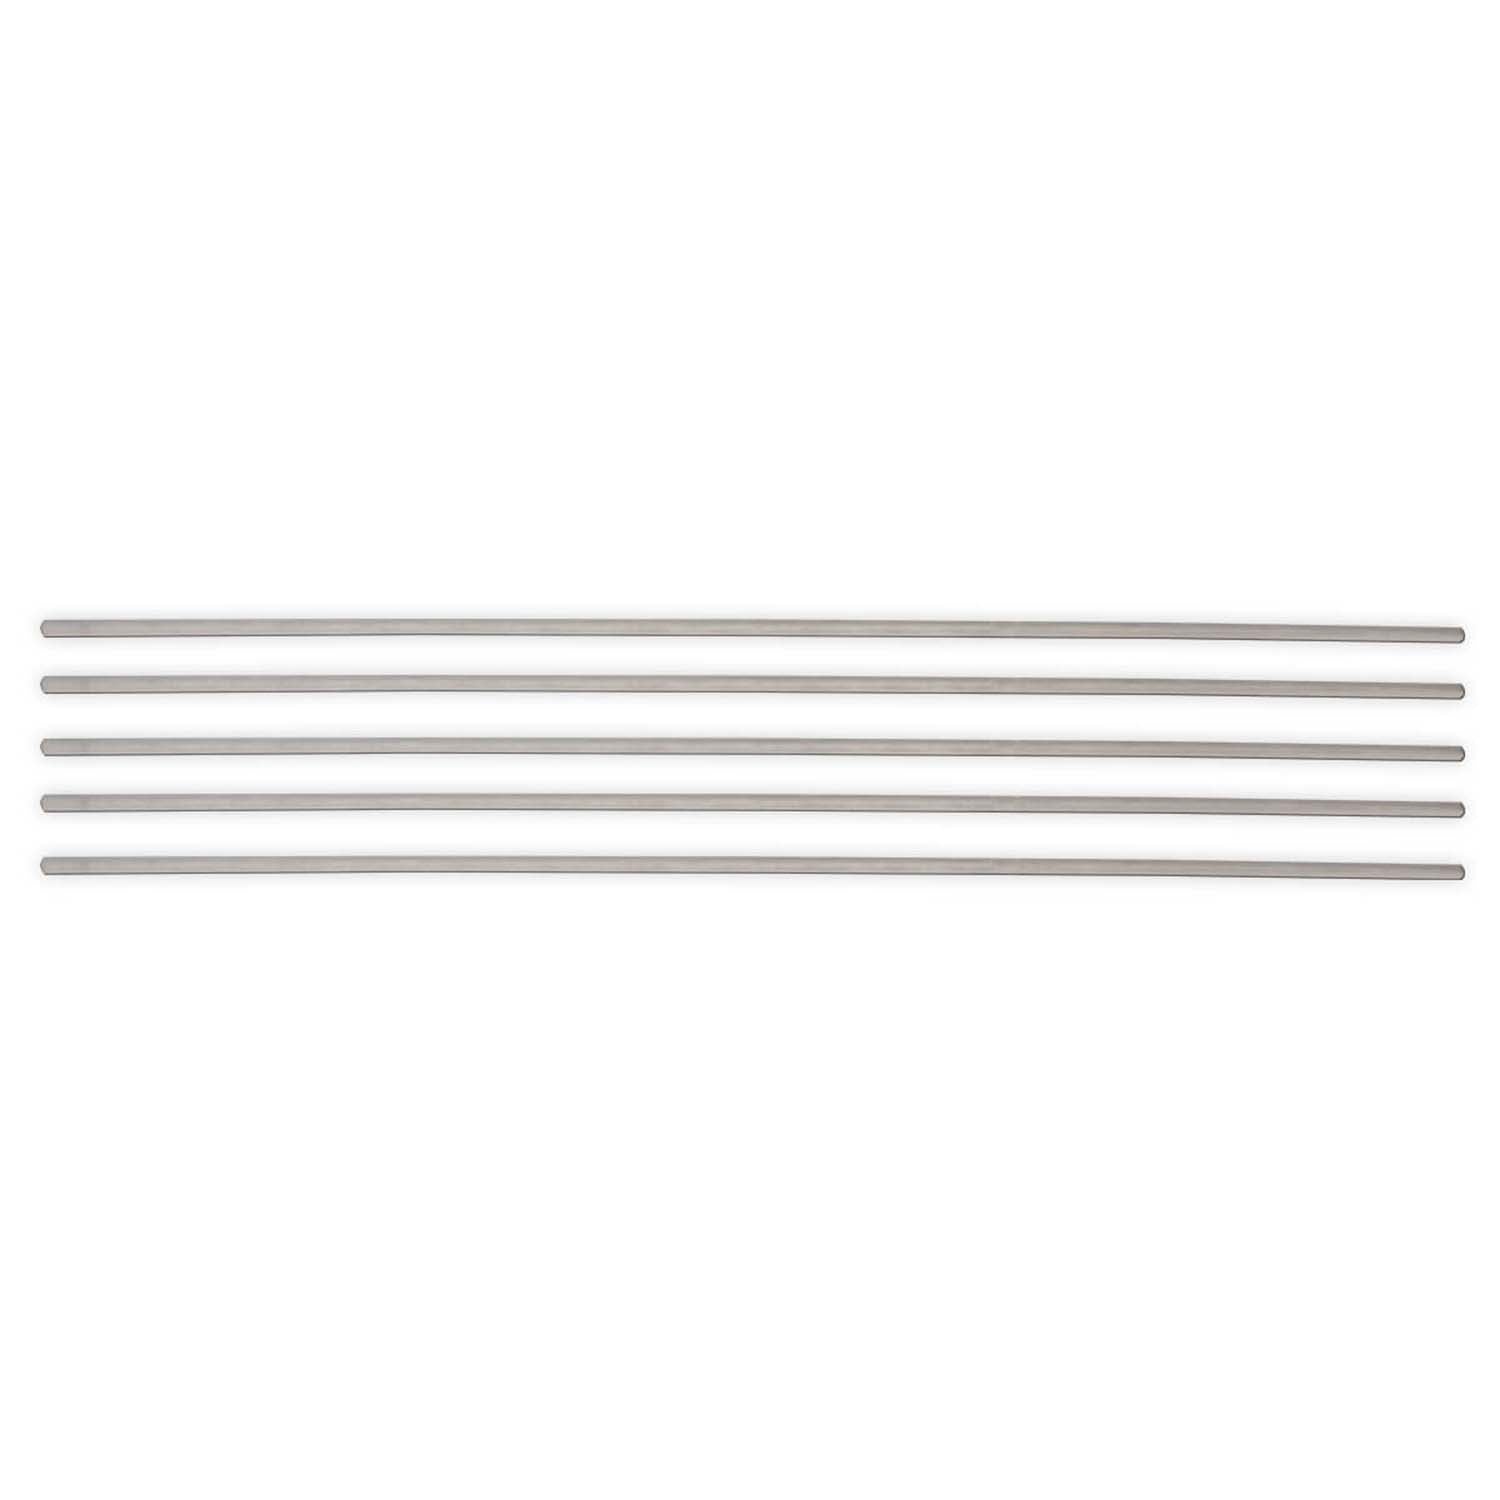 Level 5 Flat Box Replacement Blades (5-Pack)